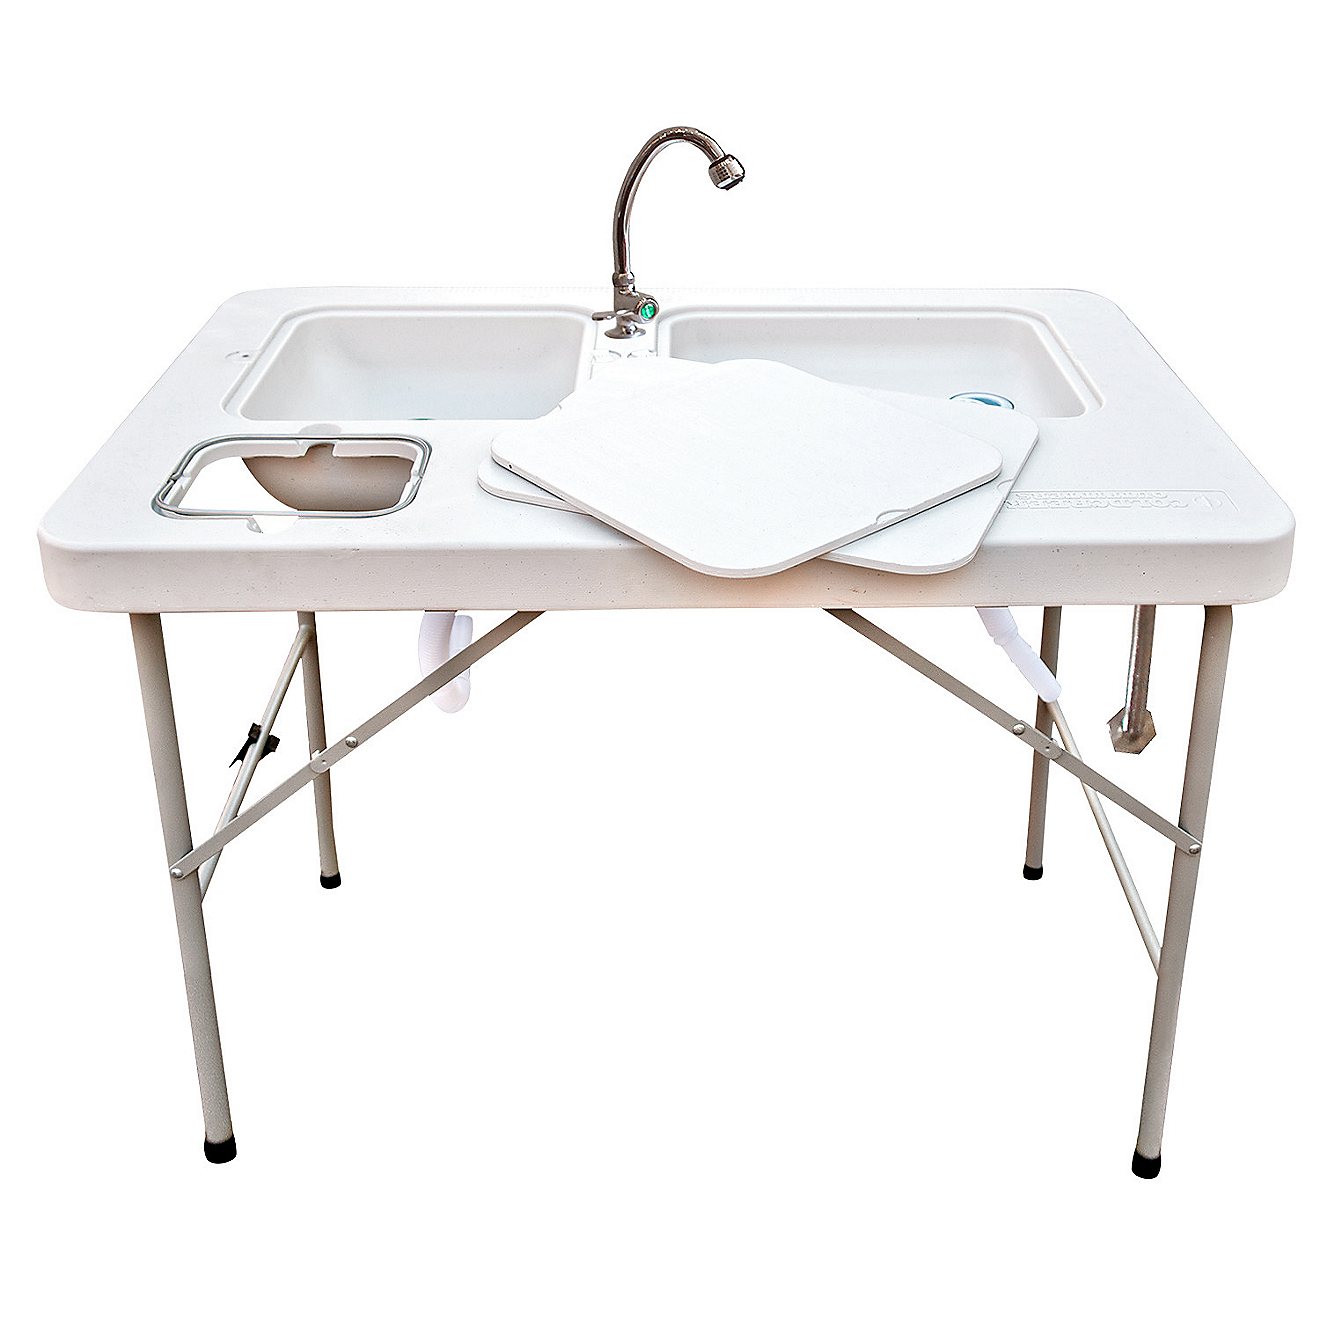 Coldcreek Outfitters Ultimate Fillet Station with Faucet                                                                         - view number 1